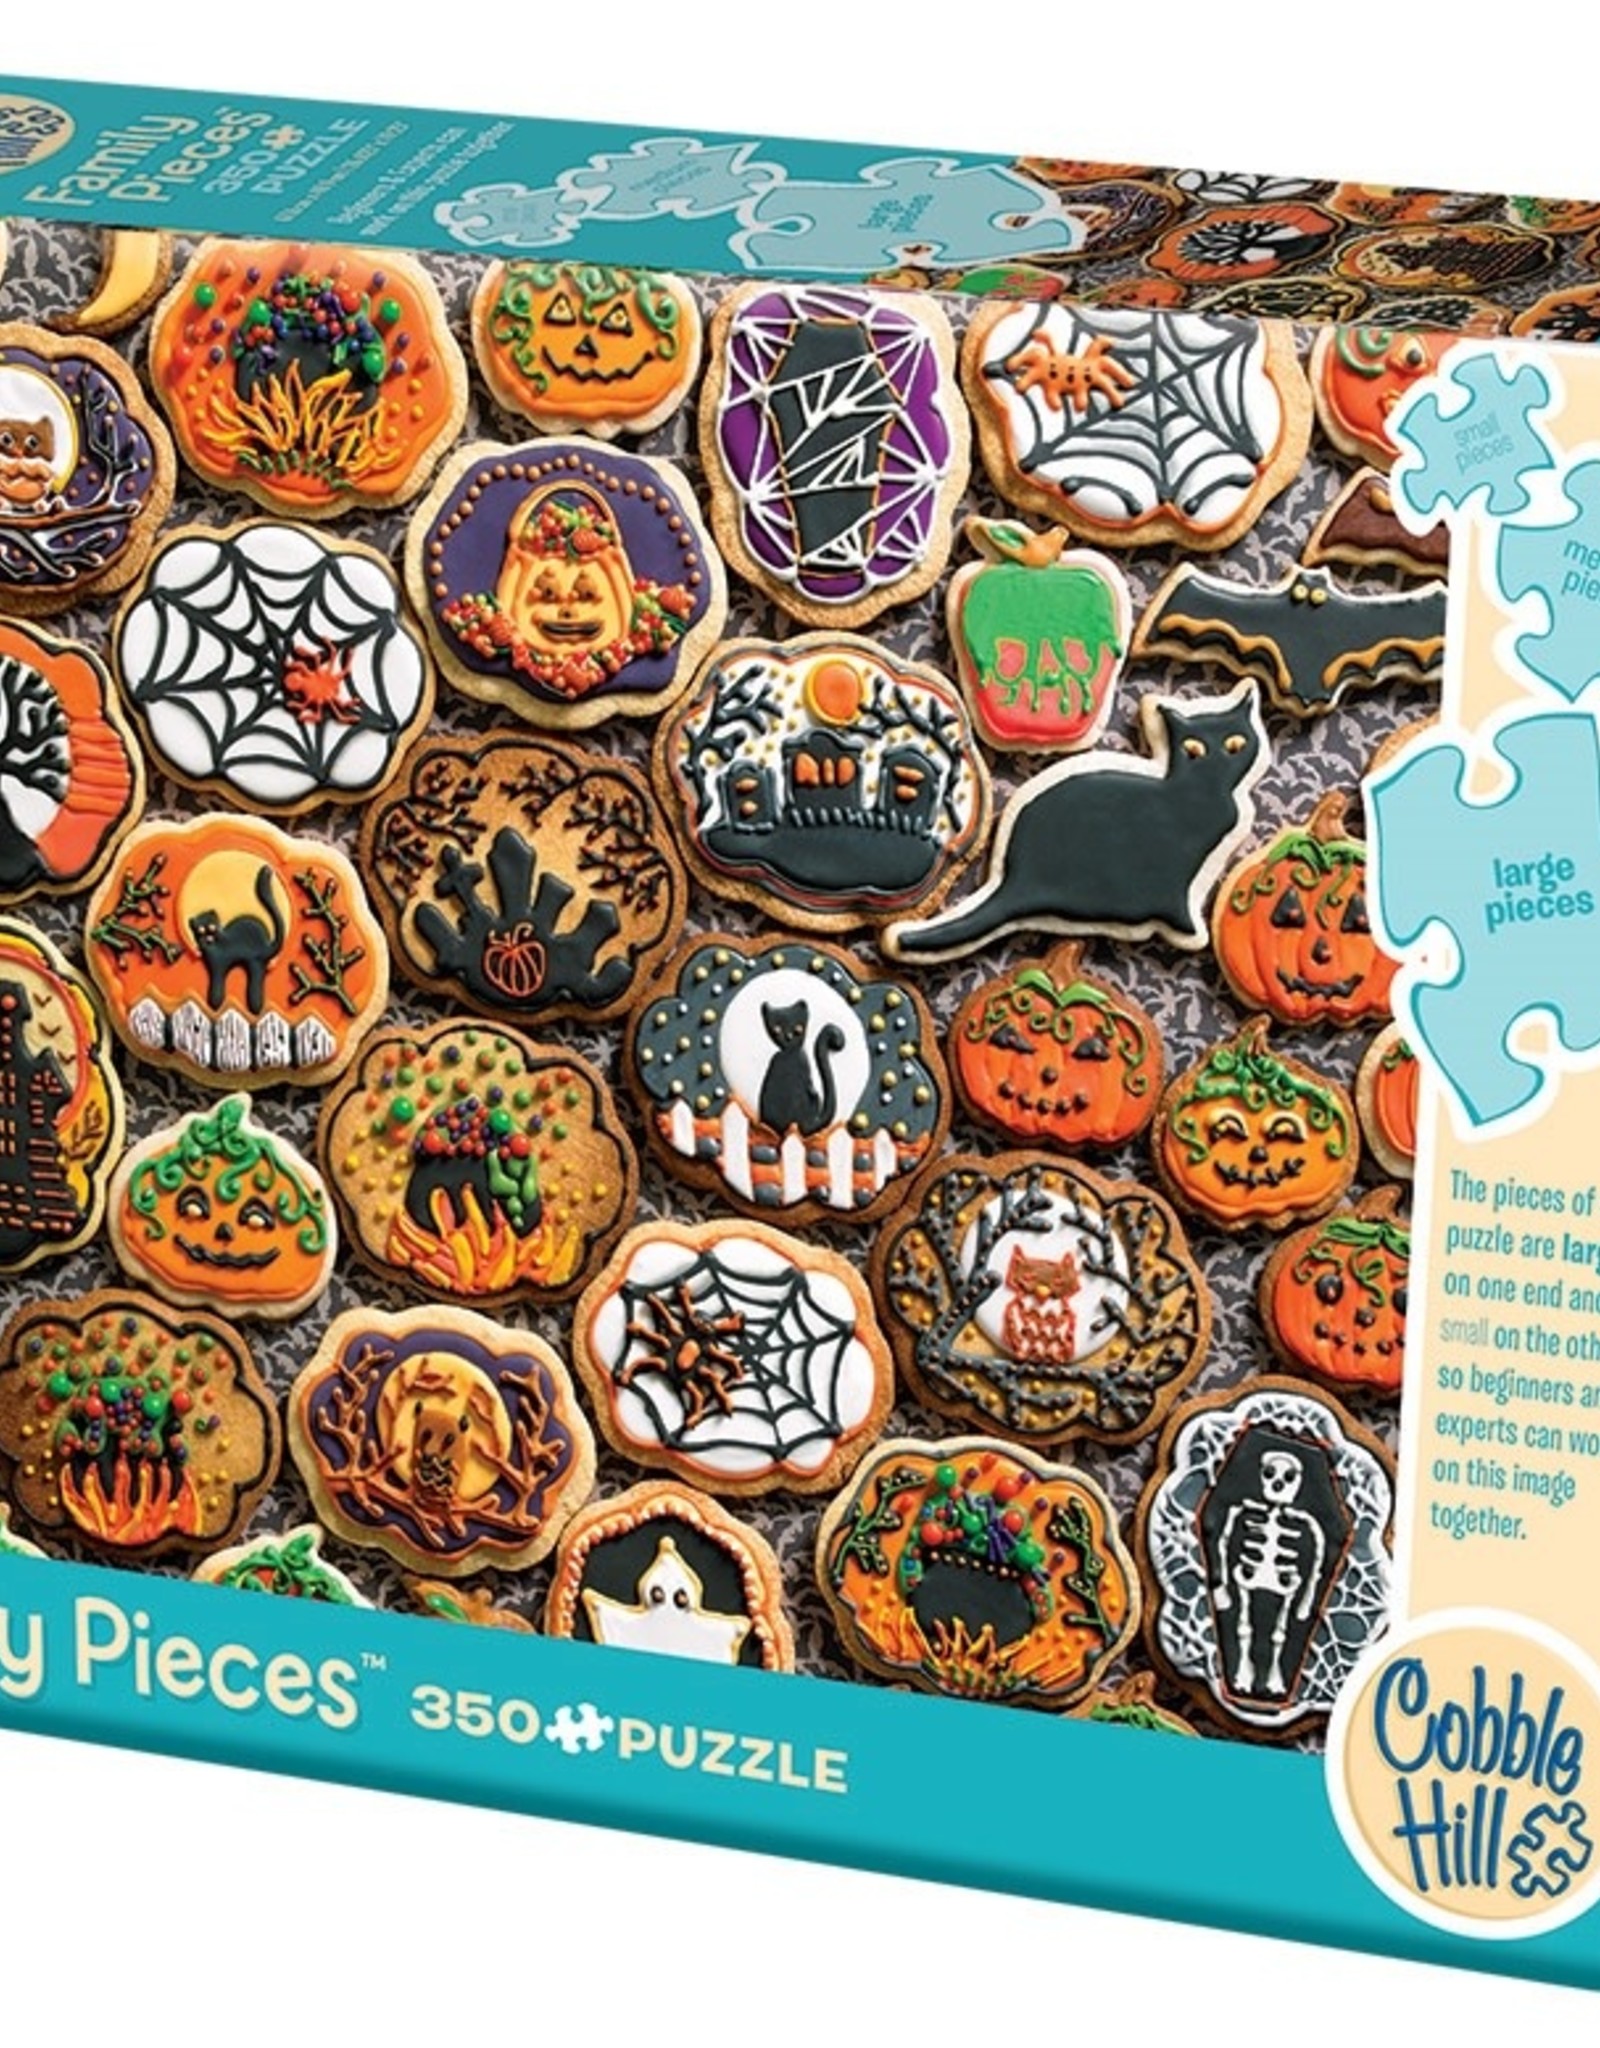 Cobble Hill Puzzles Halloween Cookies - 350 Piece Family Puzzle